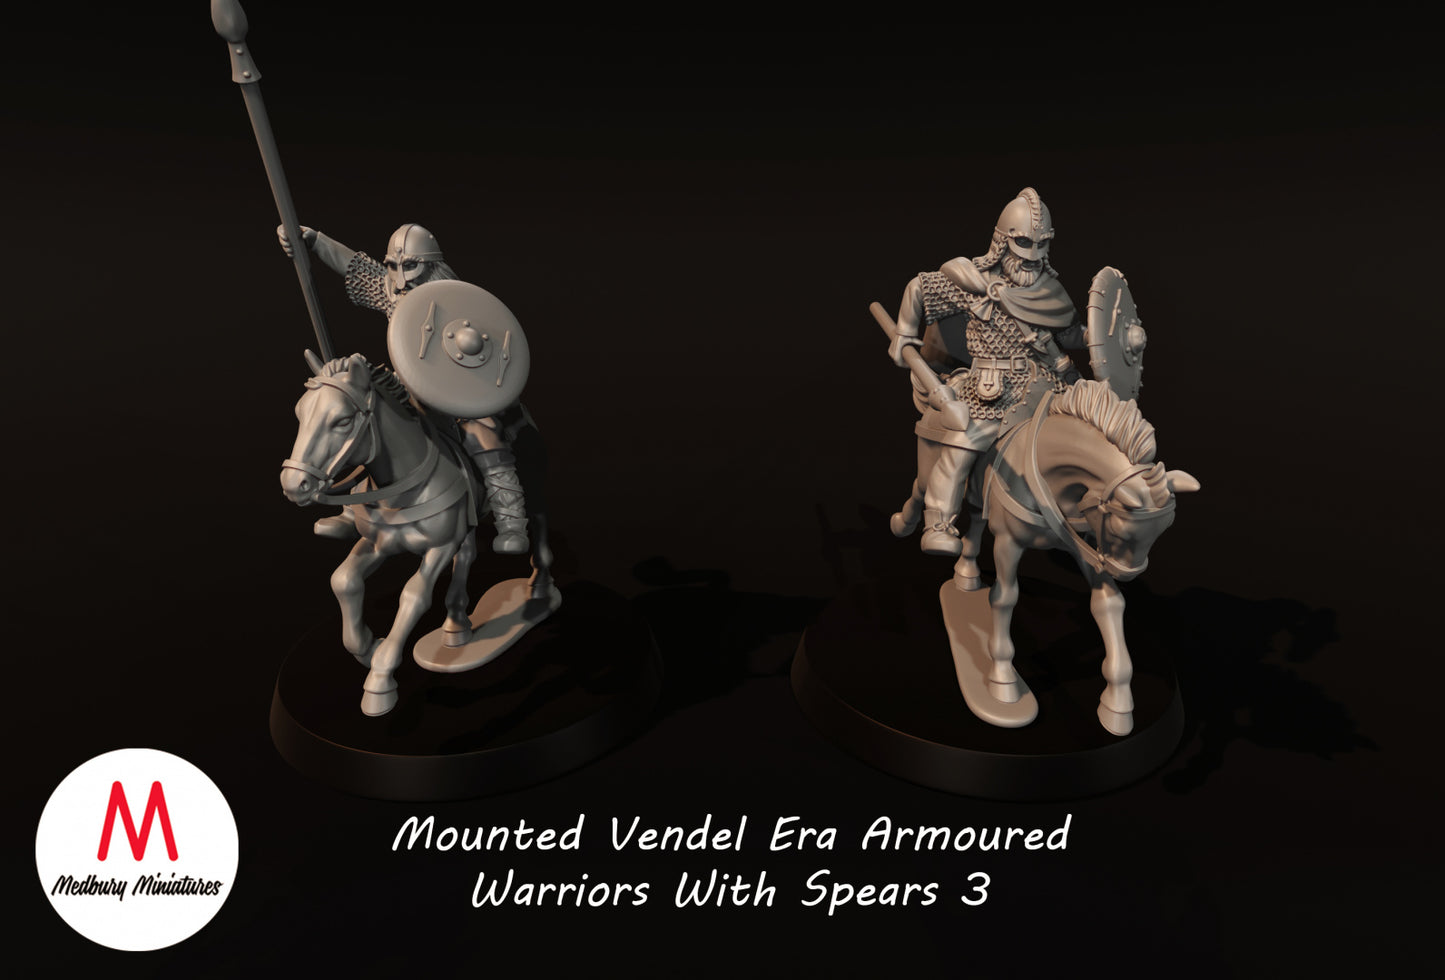 Mounted Vendel Era Armored Warriors With Spears 3